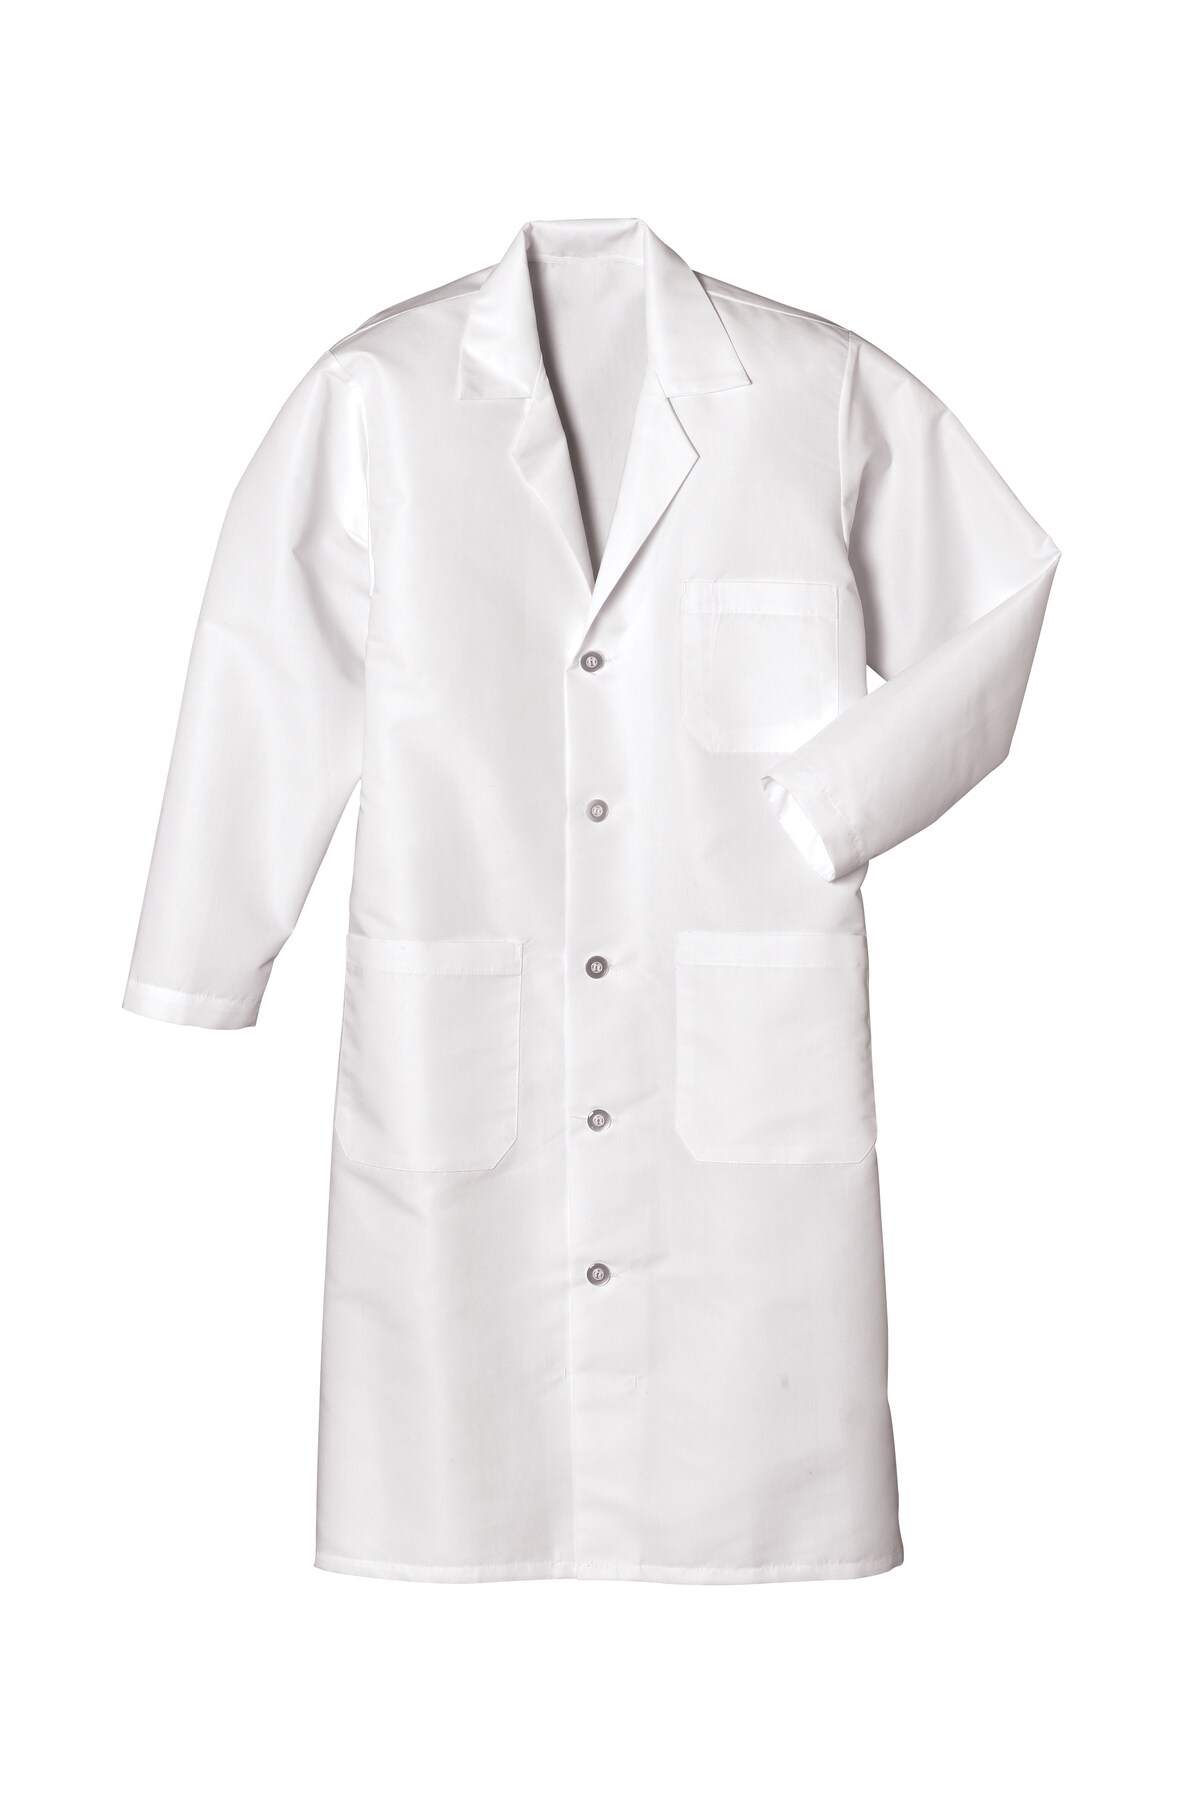 Quality Full Lab Coat - an Essential Garment for Professionals Working in Various Scientific and Medical Fields | RADYAN&#xAE;